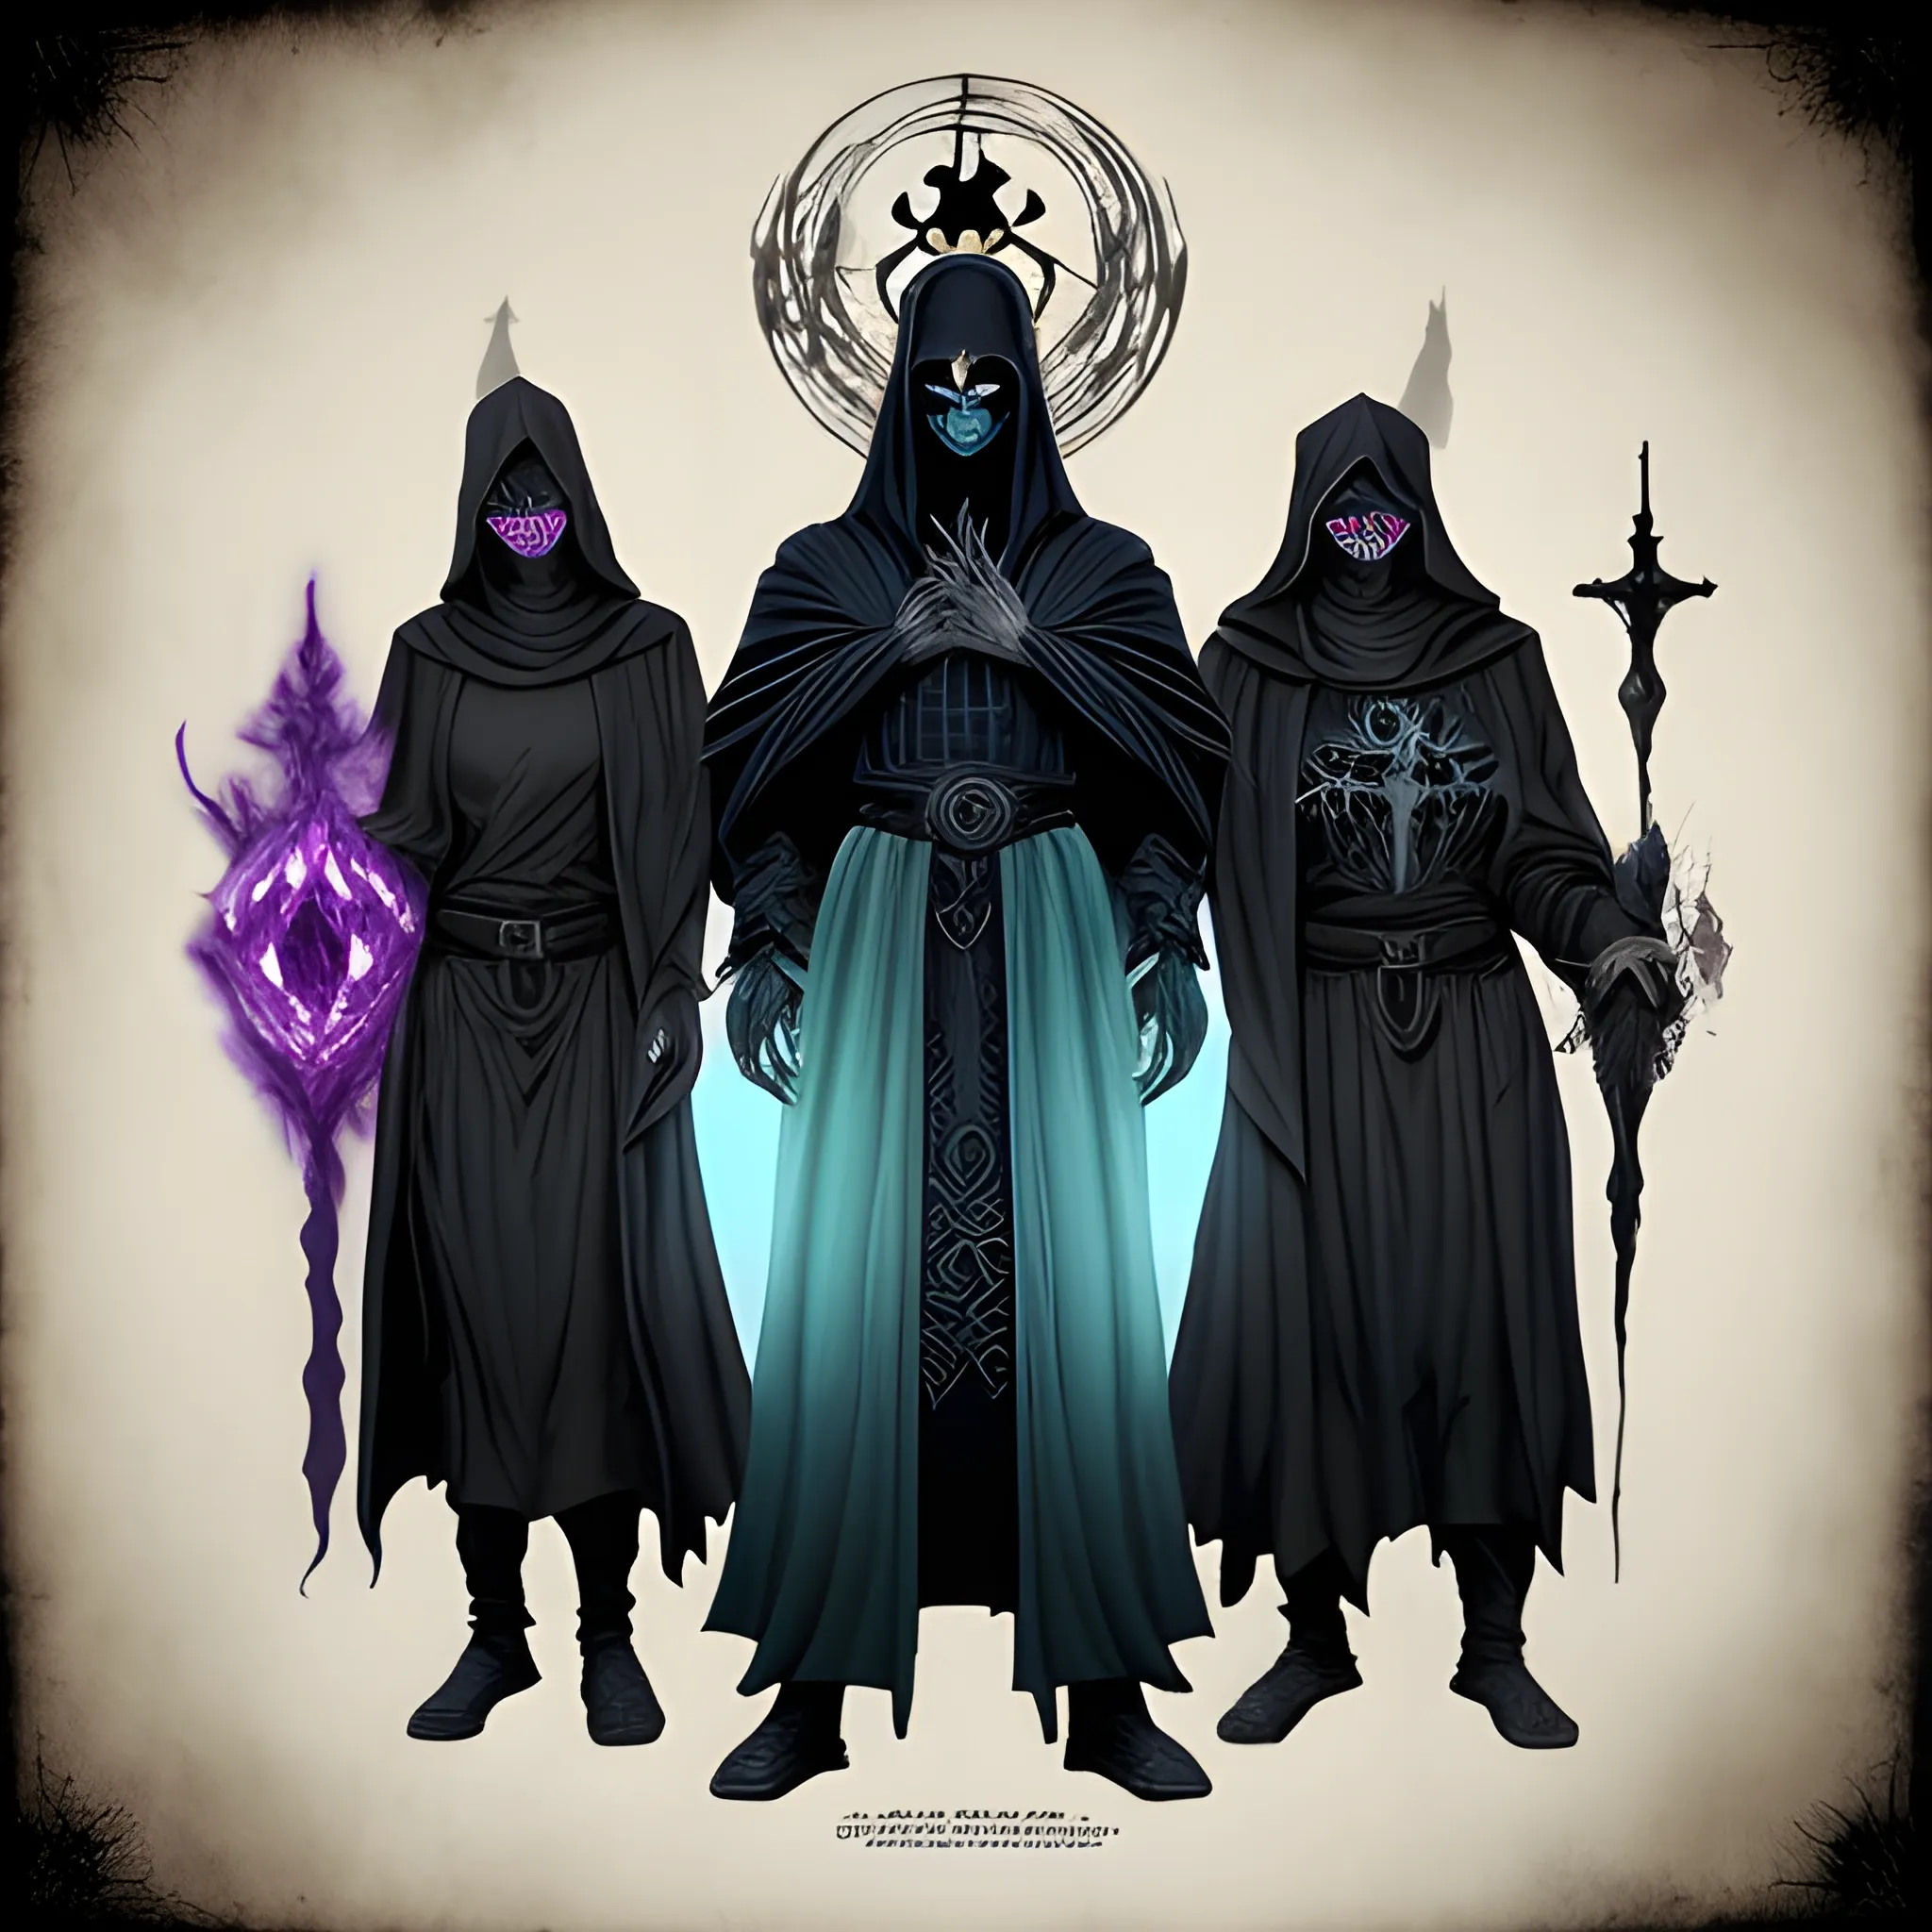 Dark Attire: The cultist wear long, flowing robes in shades of deep purple, black, or dark gray. The robes are often adorned with occult symbols and sigils associated with necromantic magic and Malachi's dark influence. The hoods of their robes are typically pulled up, casting shadows over their faces, giving them an air of mystery and menace.

Face Coverings: Some cultists wear face coverings or masks, further obscuring their features. These coverings often feature unsettling designs, such as skeletal faces or demonic visages, symbolizing their allegiance to death and darkness.

Occult Accessories: Cultists may wear various occult accessories, such as bone necklaces, finger bones, or amulets adorned with dark gems or symbols. These items are believed to channel the powers of necromancy and connect the wearer to the forces of evil.

Pallid Skin: Prolonged exposure to dark magic and their devotion to Malachi may give the cultists' skin a sickly pallor, further emphasizing their otherworldly appearance.

Glowing Eyes: In some cases, the eyes of the cultists may glow with an unnatural or eerie light, hinting at their connection to the dark powers they serve. The glow can be a pale blue, sickly green, or even crimson, depending on the nature of their necromantic abilities.

Ritualistic Tattoos: Some cultists bear ritualistic tattoos etched into their skin, marking their allegiance to Malachi and the dark arts. These tattoos often depict ominous symbols, arcane runes, or images associated with death and decay.

Feral Traits: As a result of their embrace of dark powers, some cultists may display feral traits, such as elongated canine teeth or claw-like nails, reminiscent of creatures of the night.

Overall, the appearance of Malachi's cultists is haunting and unsettling, with an aura of darkness and malevolence. Their attire, accessories, and physical features convey their allegiance to the fallen Aasimar and their commitment to furthering his nefarious plans. As they move in shadows and secrecy, they pose a significant threat to the world, ready to carry out their master's bidding and plunge Lumina Isle into everlasting darkness.